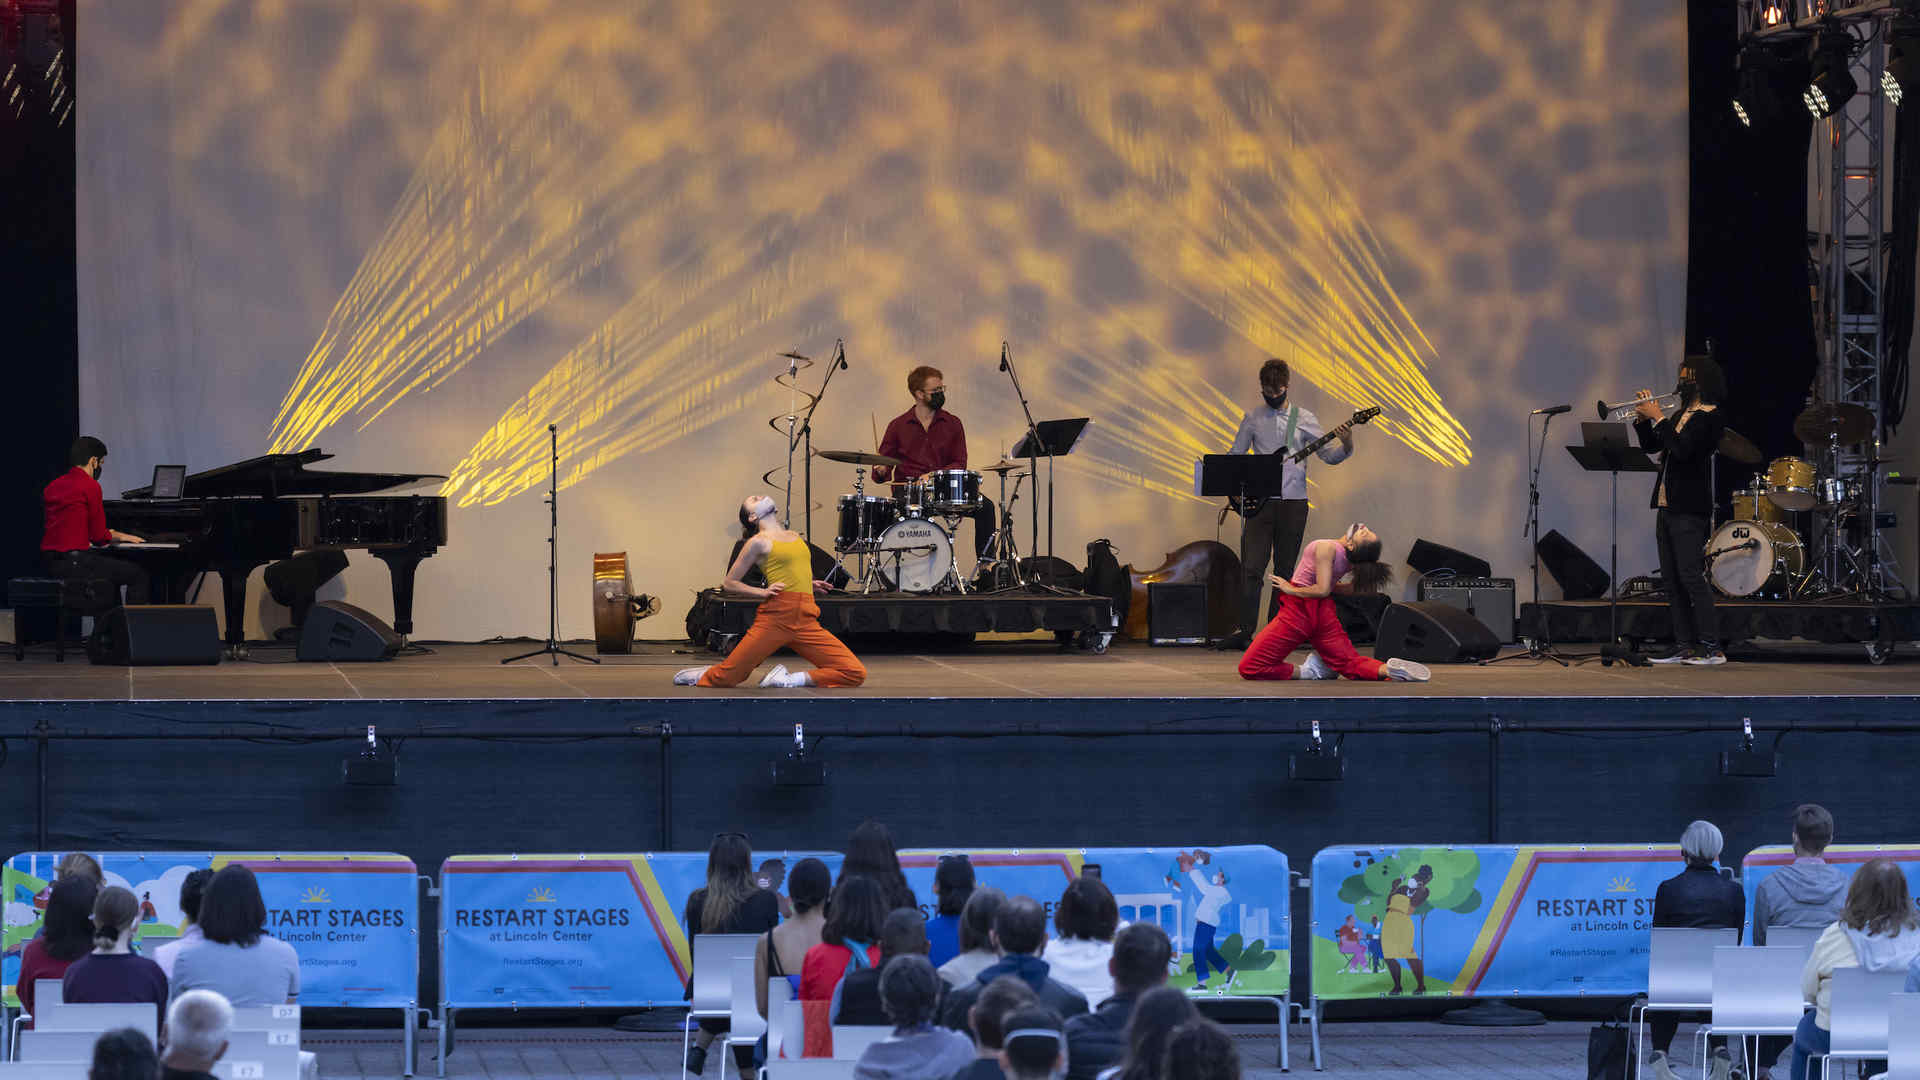 Musicians and dancers on an outdoor stage. The audience is also visible.